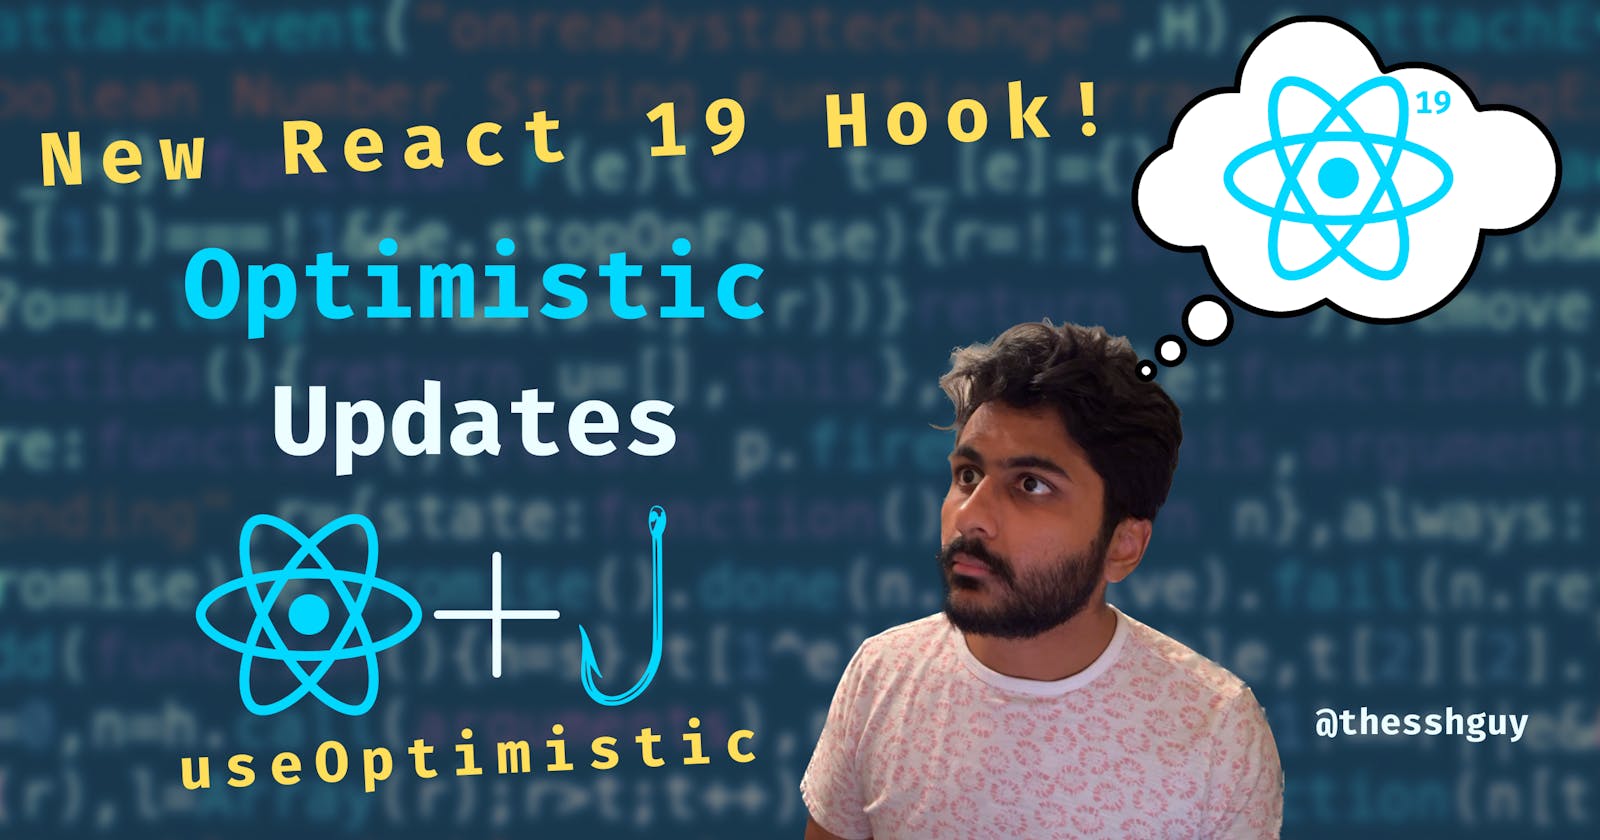 A Guide to Using React 19's Latest Hook: useOptimistic